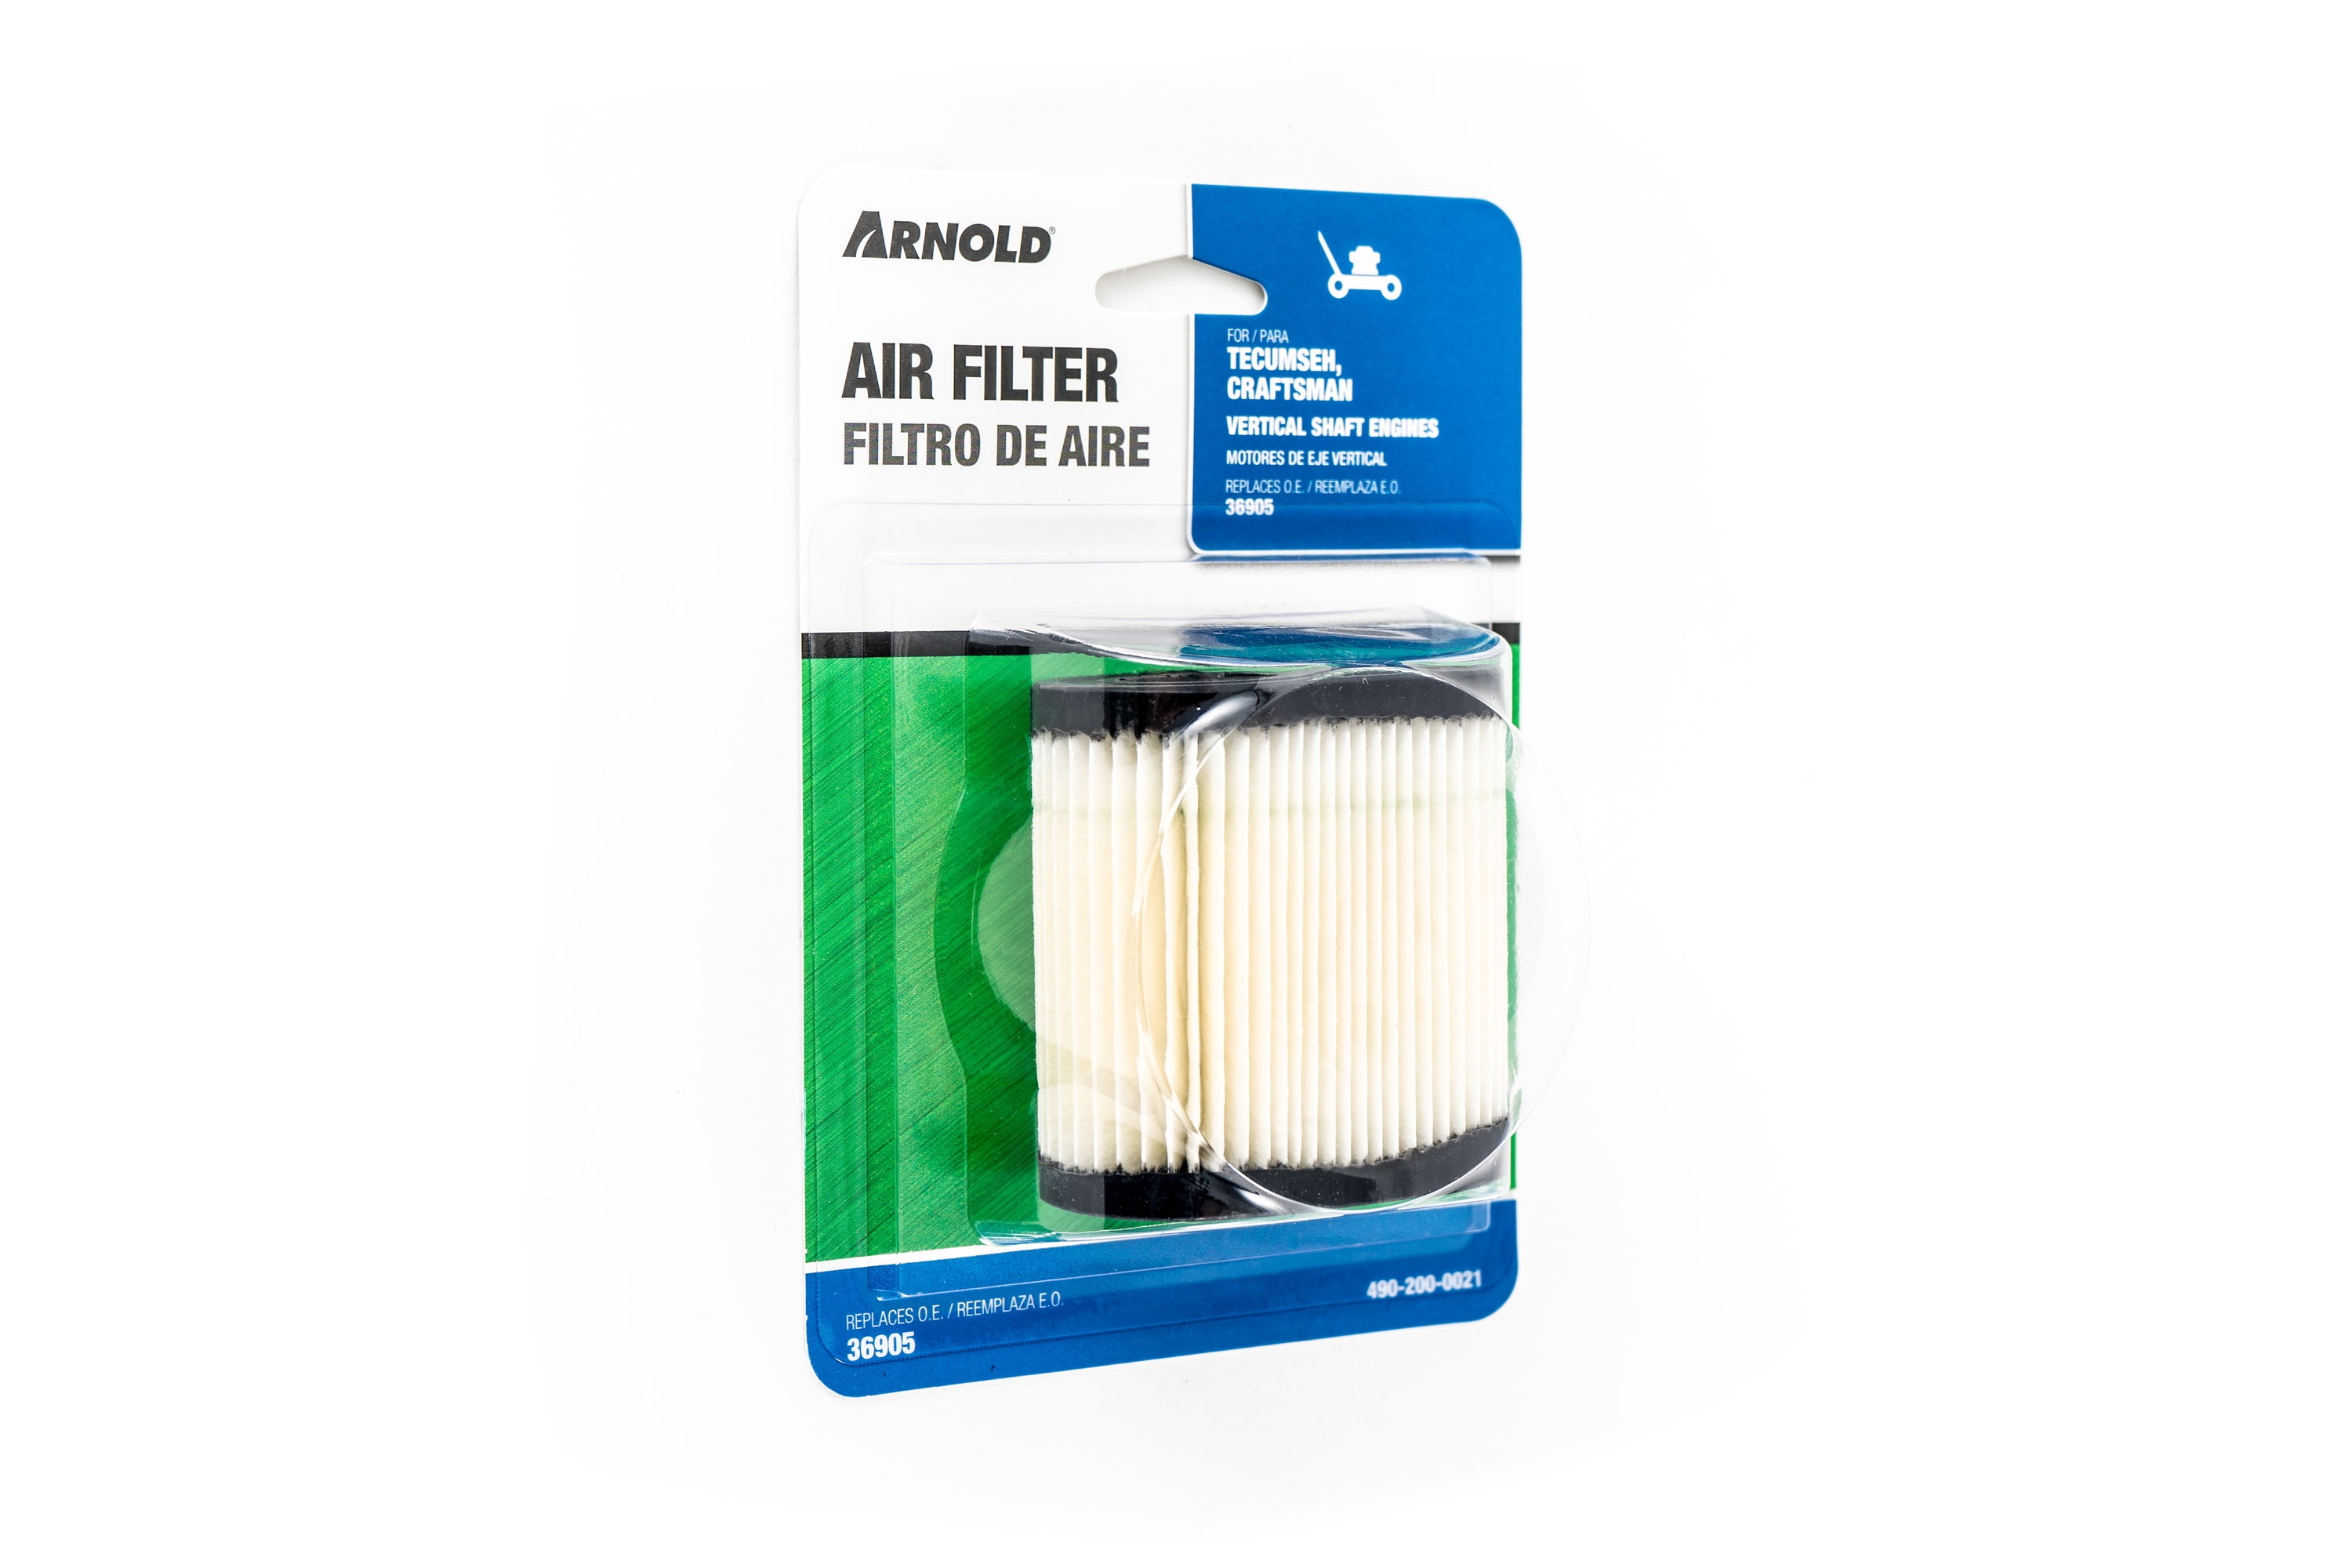 10 Questions & Answers About Engine Air Filters